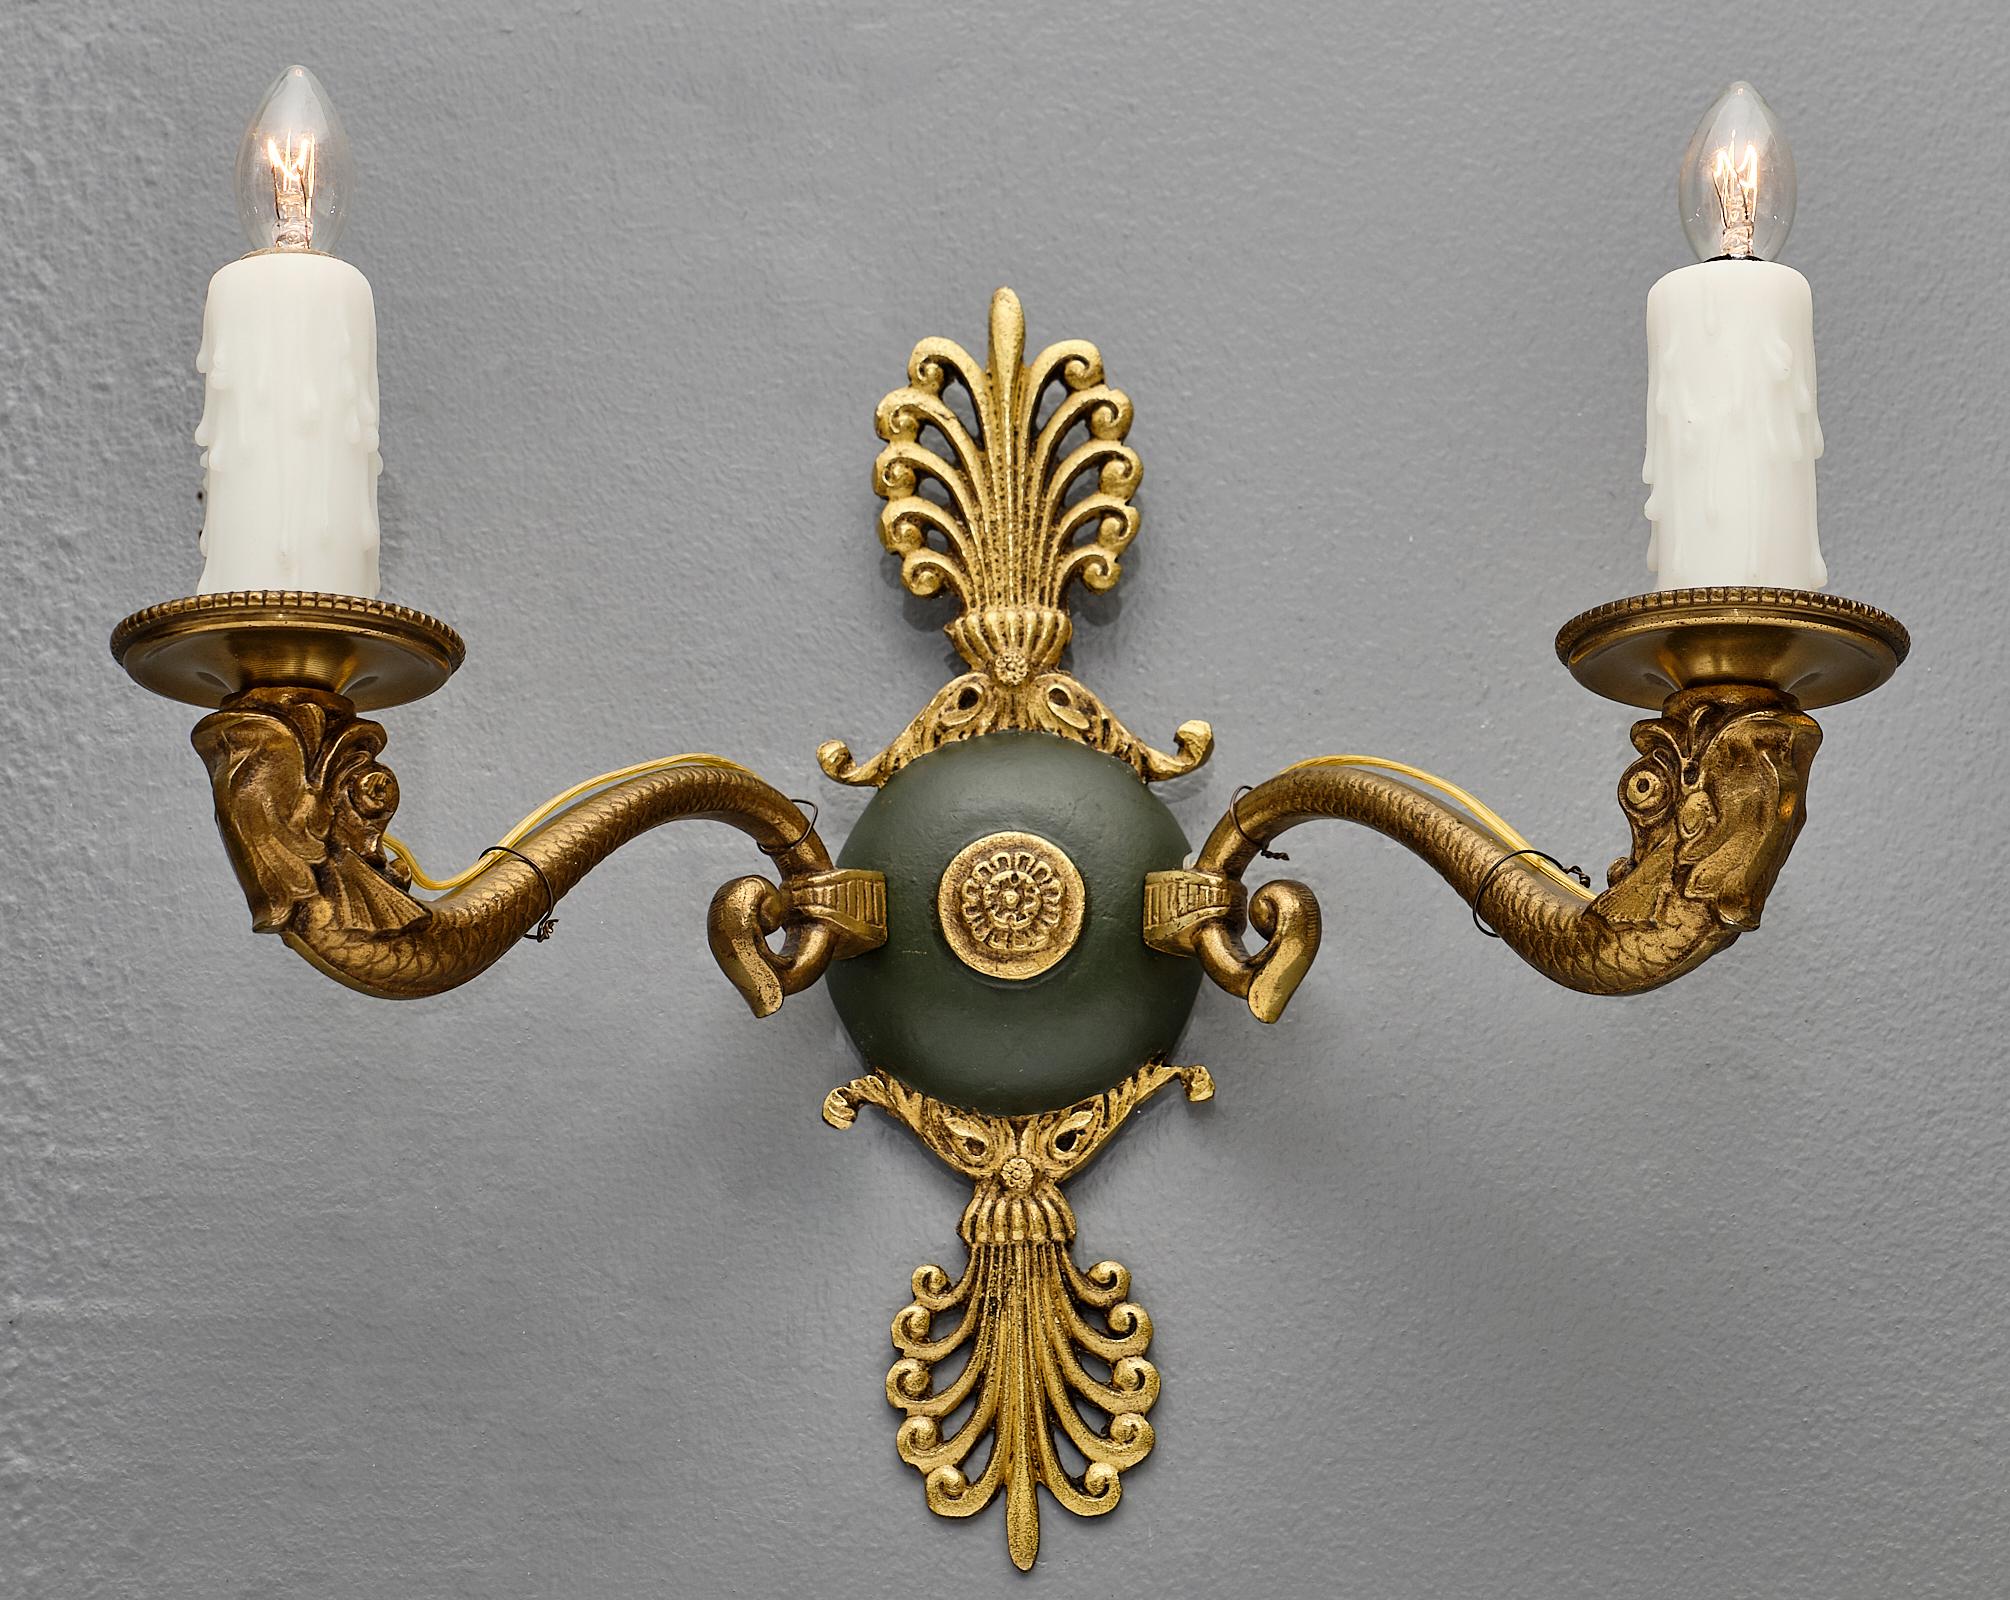 French antique Empire style sconces with acanthus leaf decor and bronze Roman dolphin arms. We love the dark green lacquer and the tole details. They have been newly wired to fit US standards.